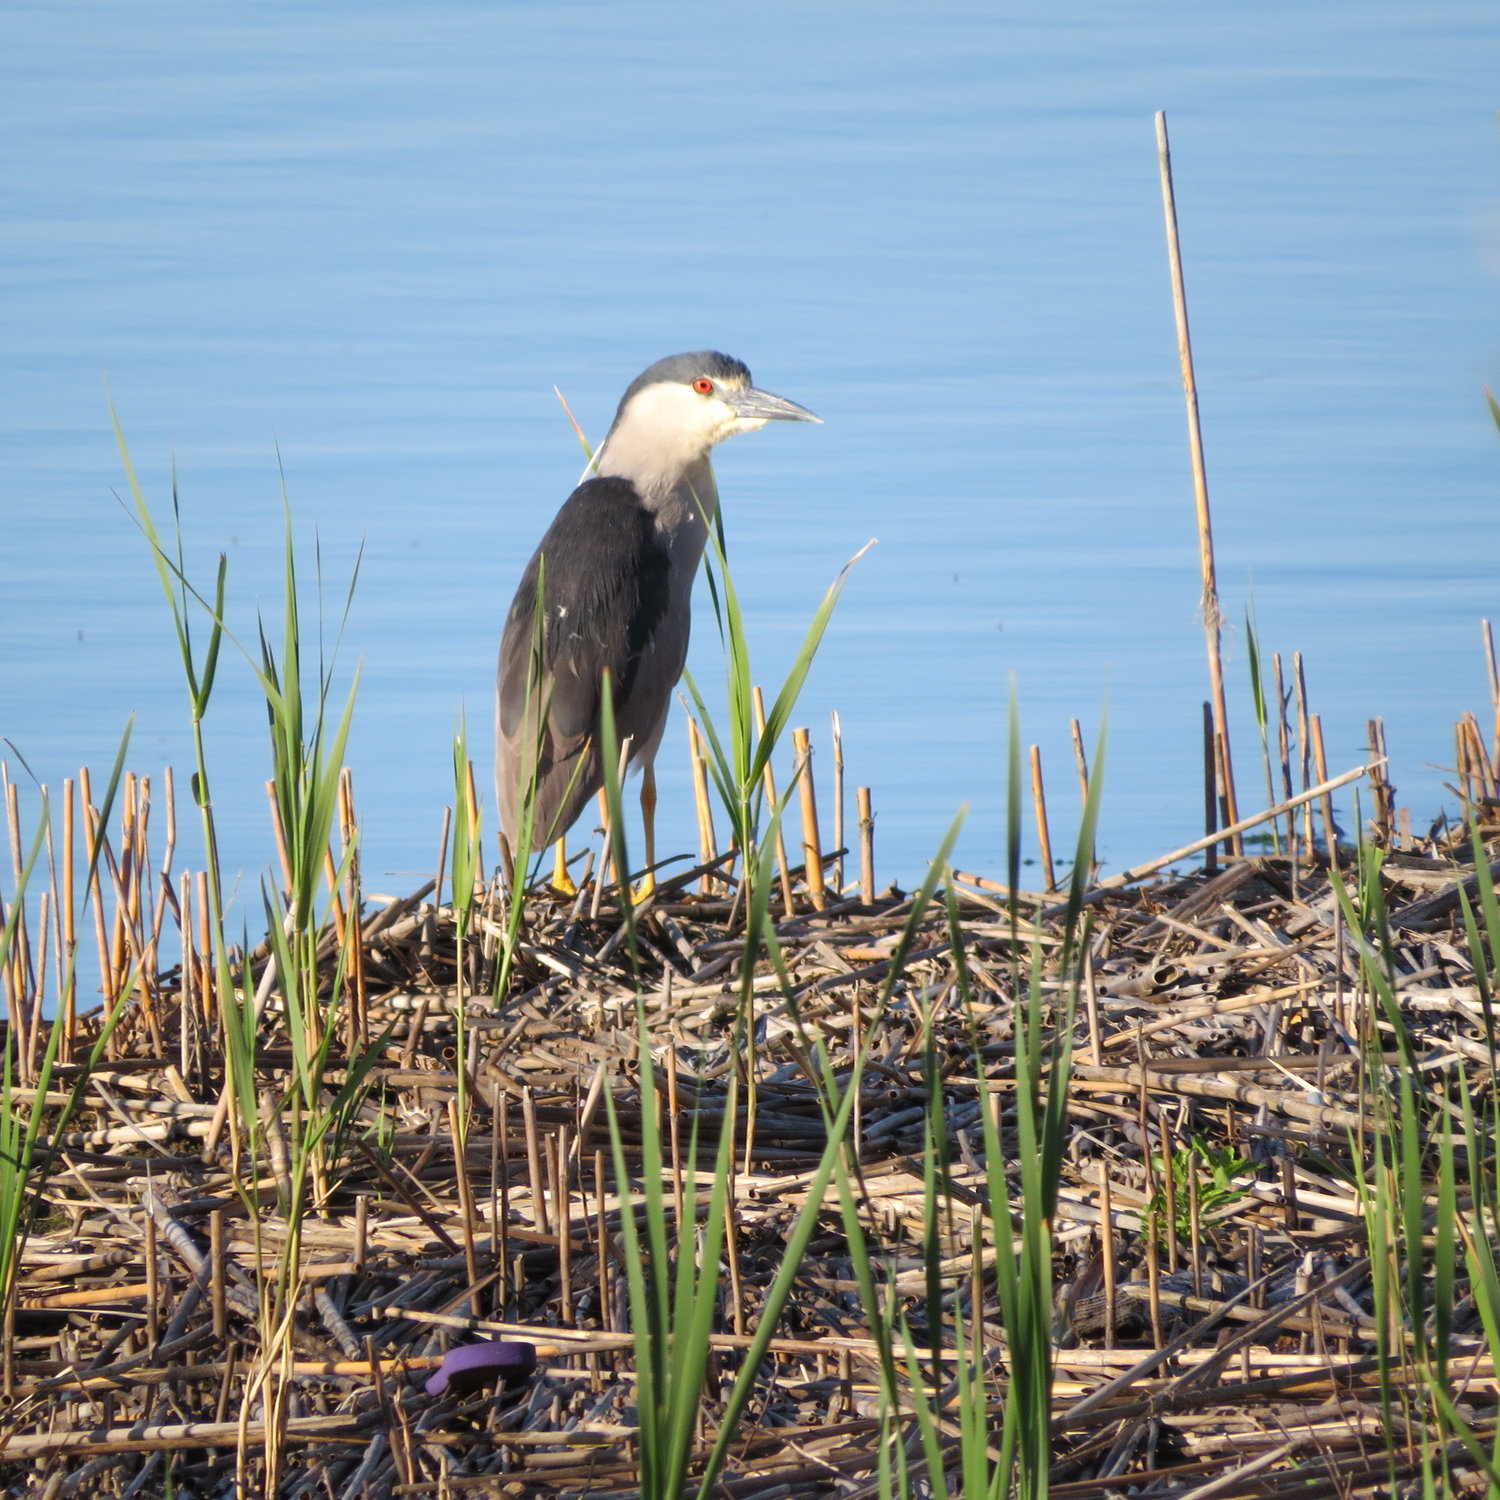 Black-crowned Night-Herons like this one still nest on-island.